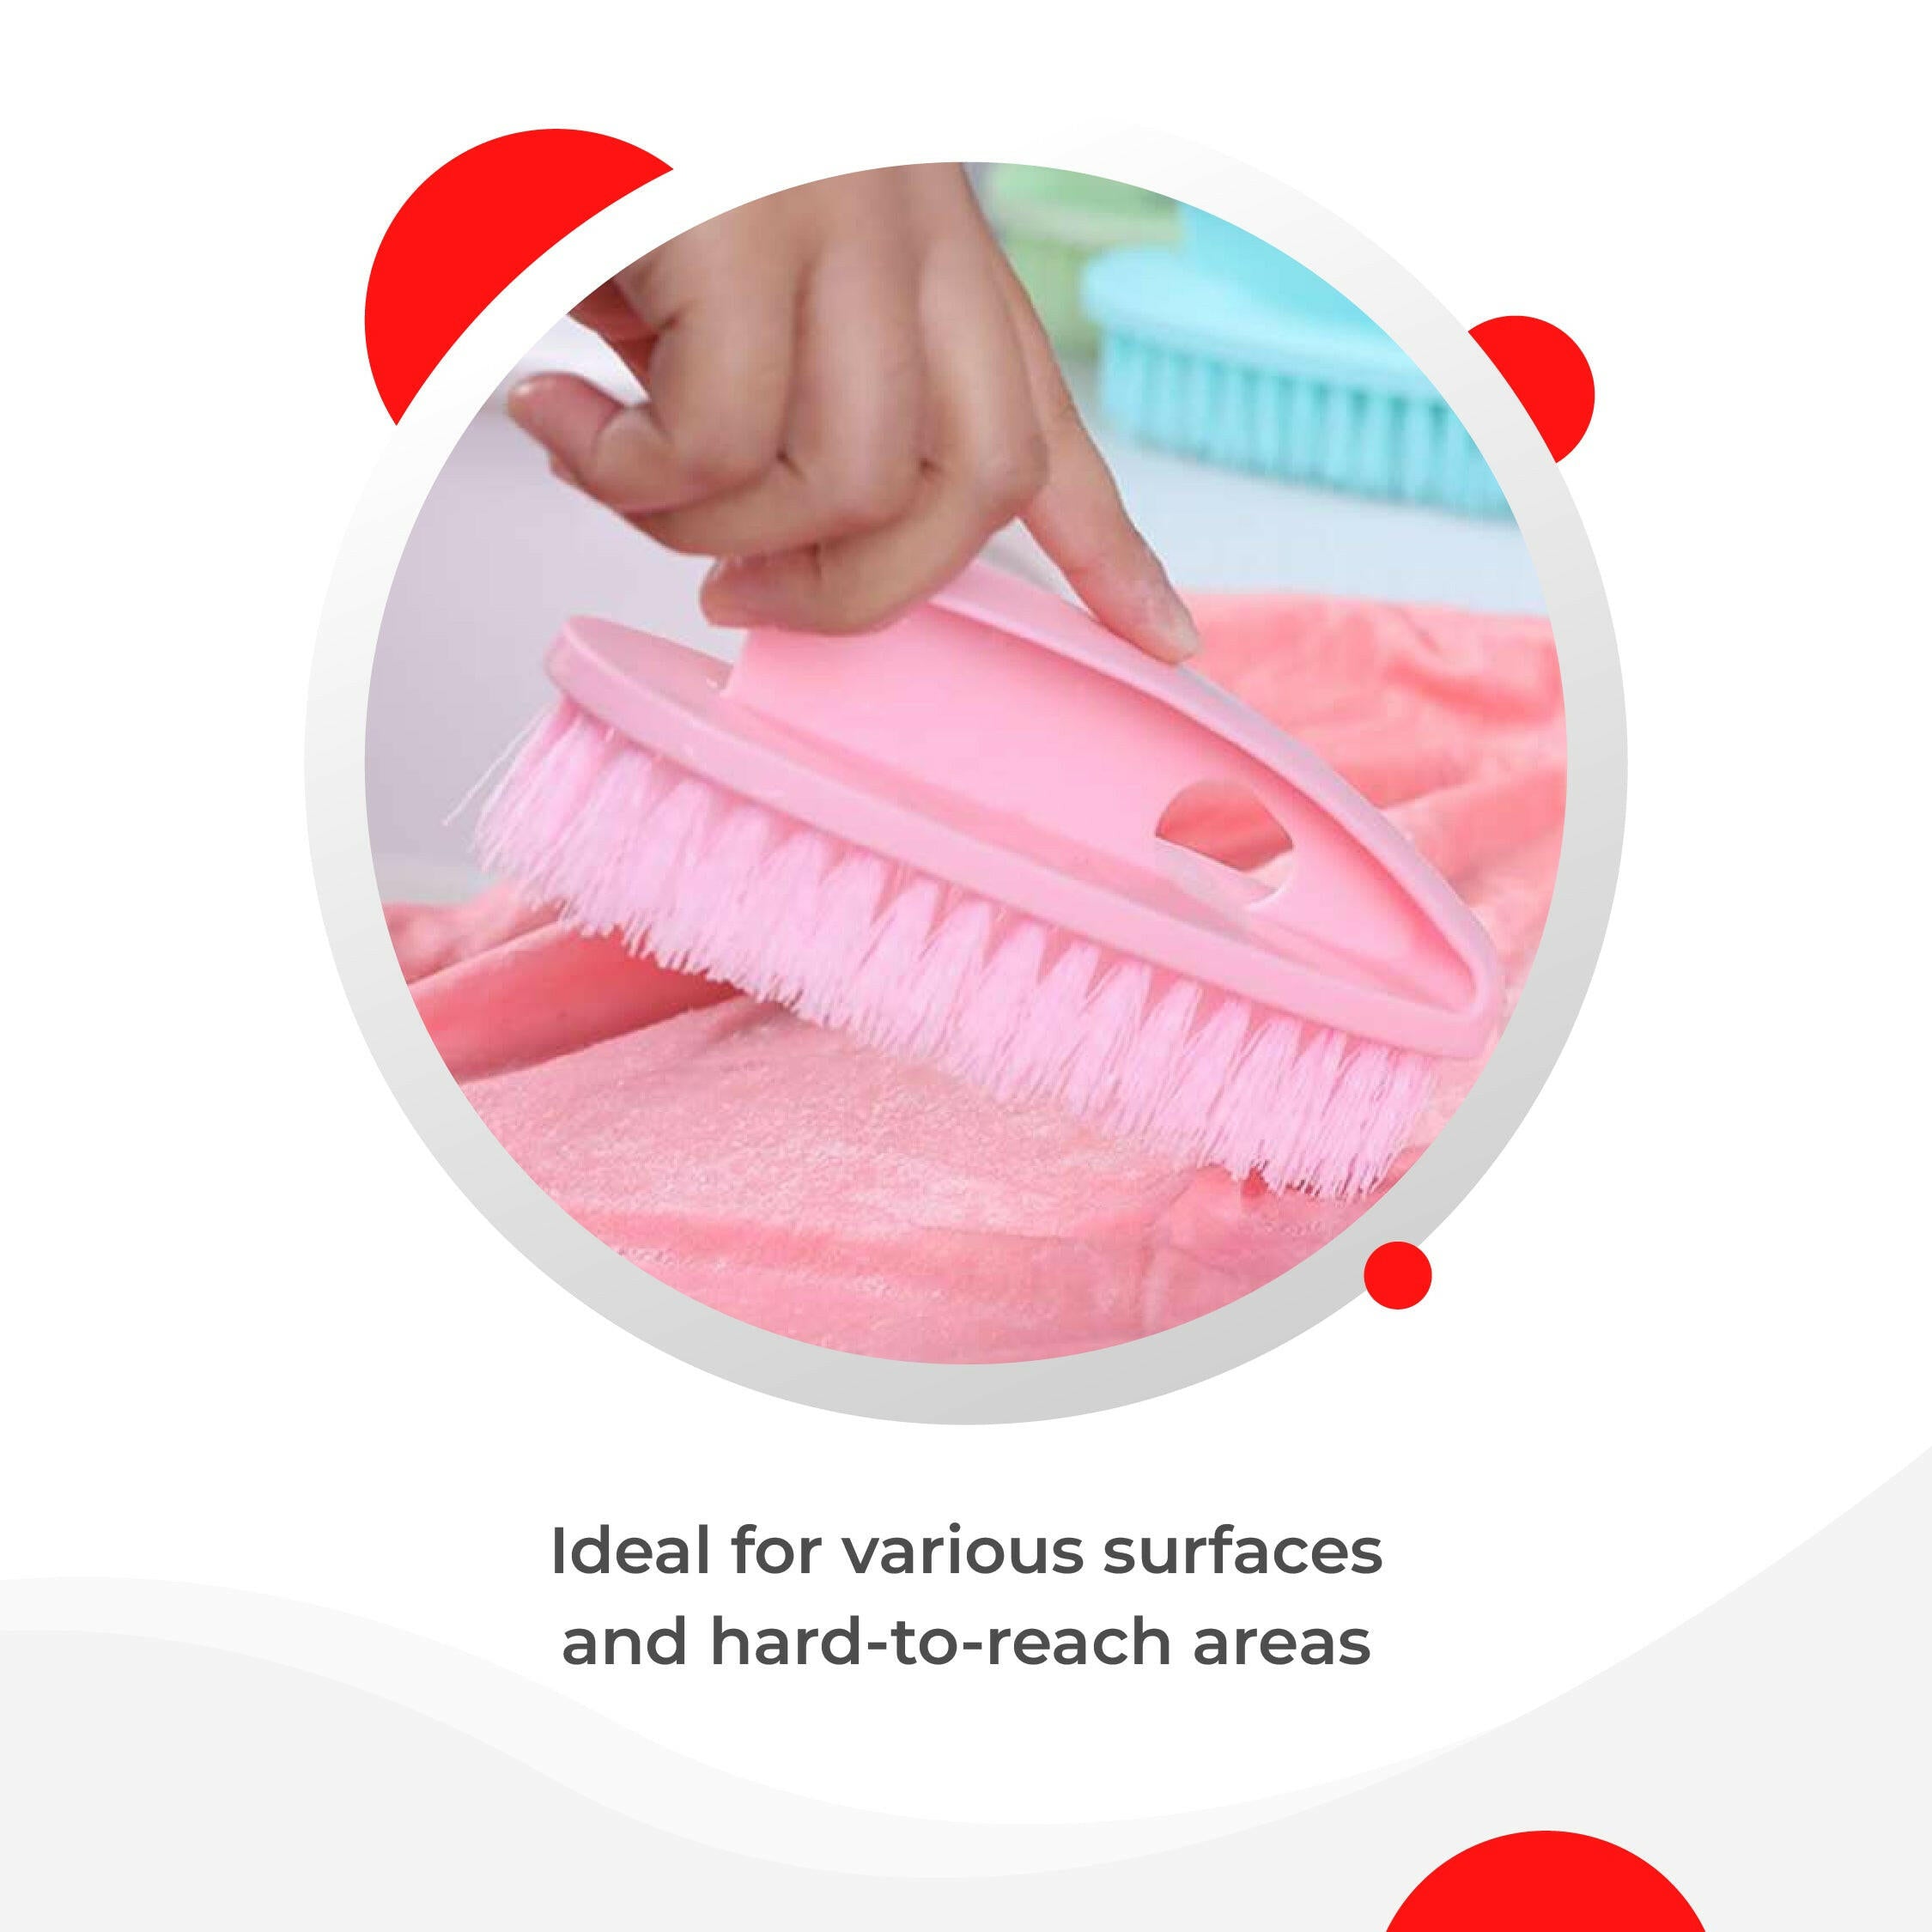 Sparkling Home: The Ultimate Cleaning Kit for Spotless Spaces!